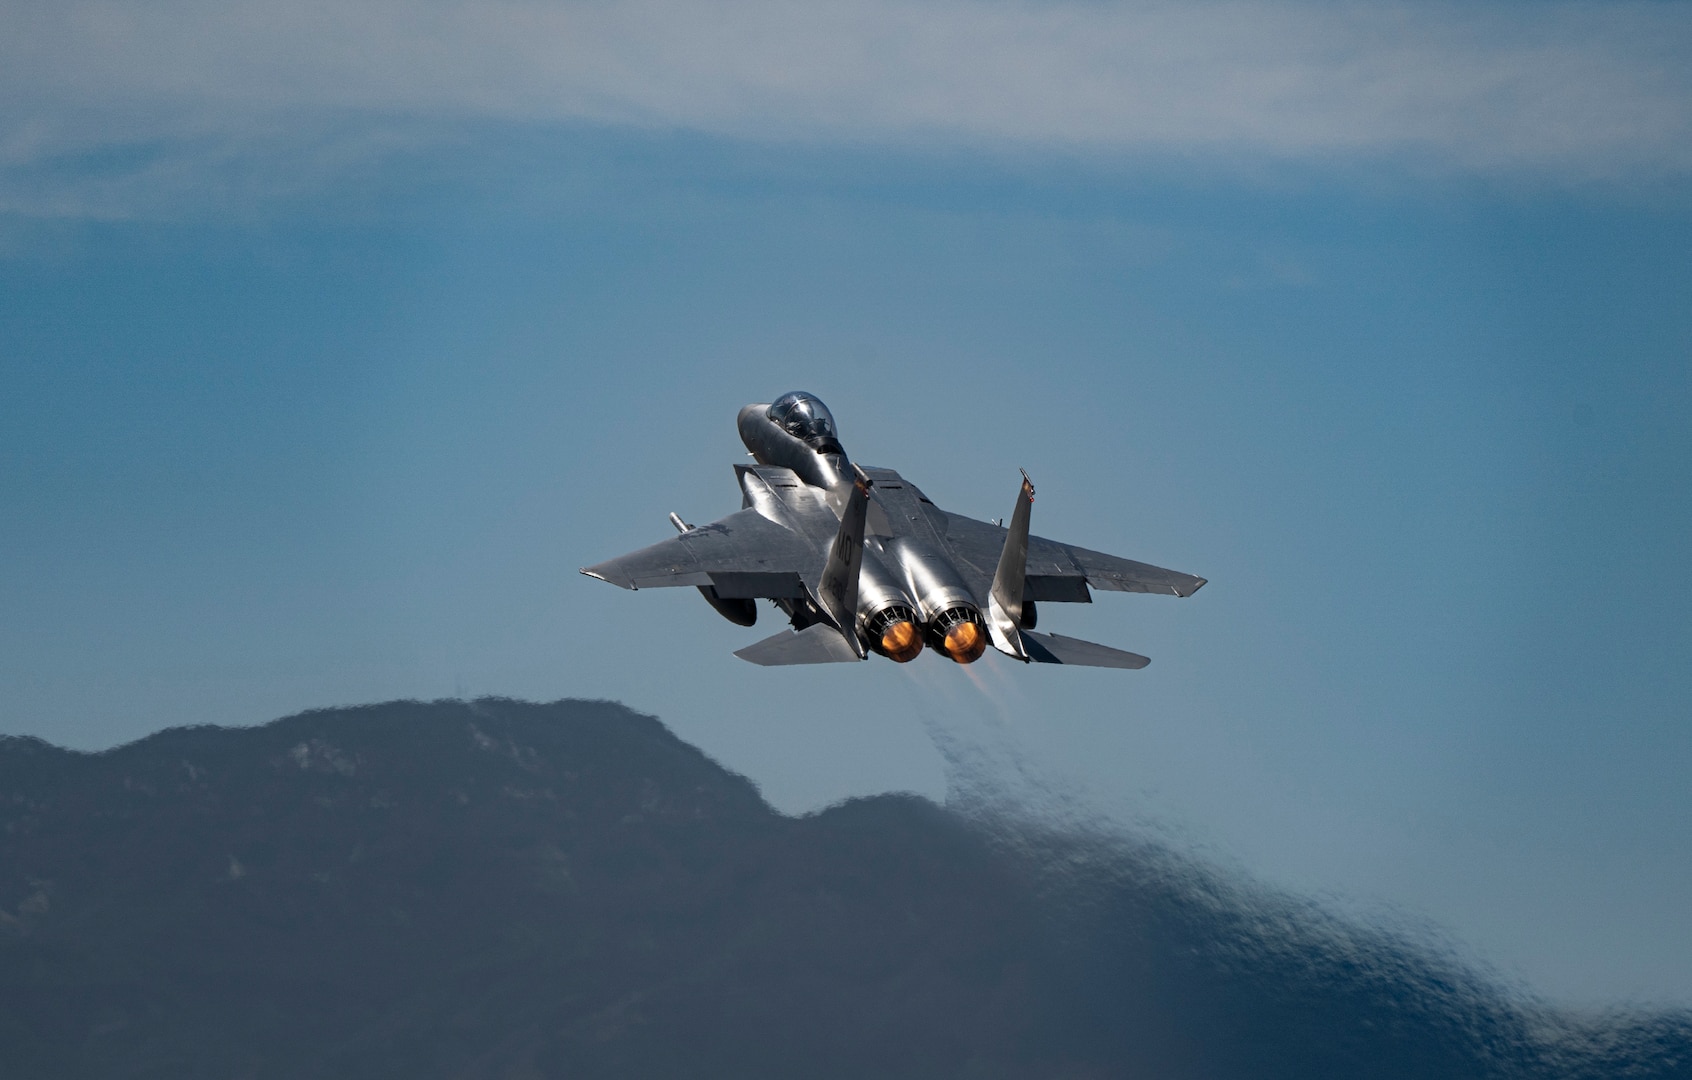 An F-15E Strike Eagle assigned to the 366th Fighter Wing, Mountain Home Air Force Base, Idaho, takes off for a Red Flag-Nellis 22-2 mission at Nellis Air Force Base, Nevada, March 9, 2022. The 414th Combat Training Squadron conducts Red Flag exercises to provide aircrews the experience of multiple, intensive air combat sorties in the safety of a training environment.